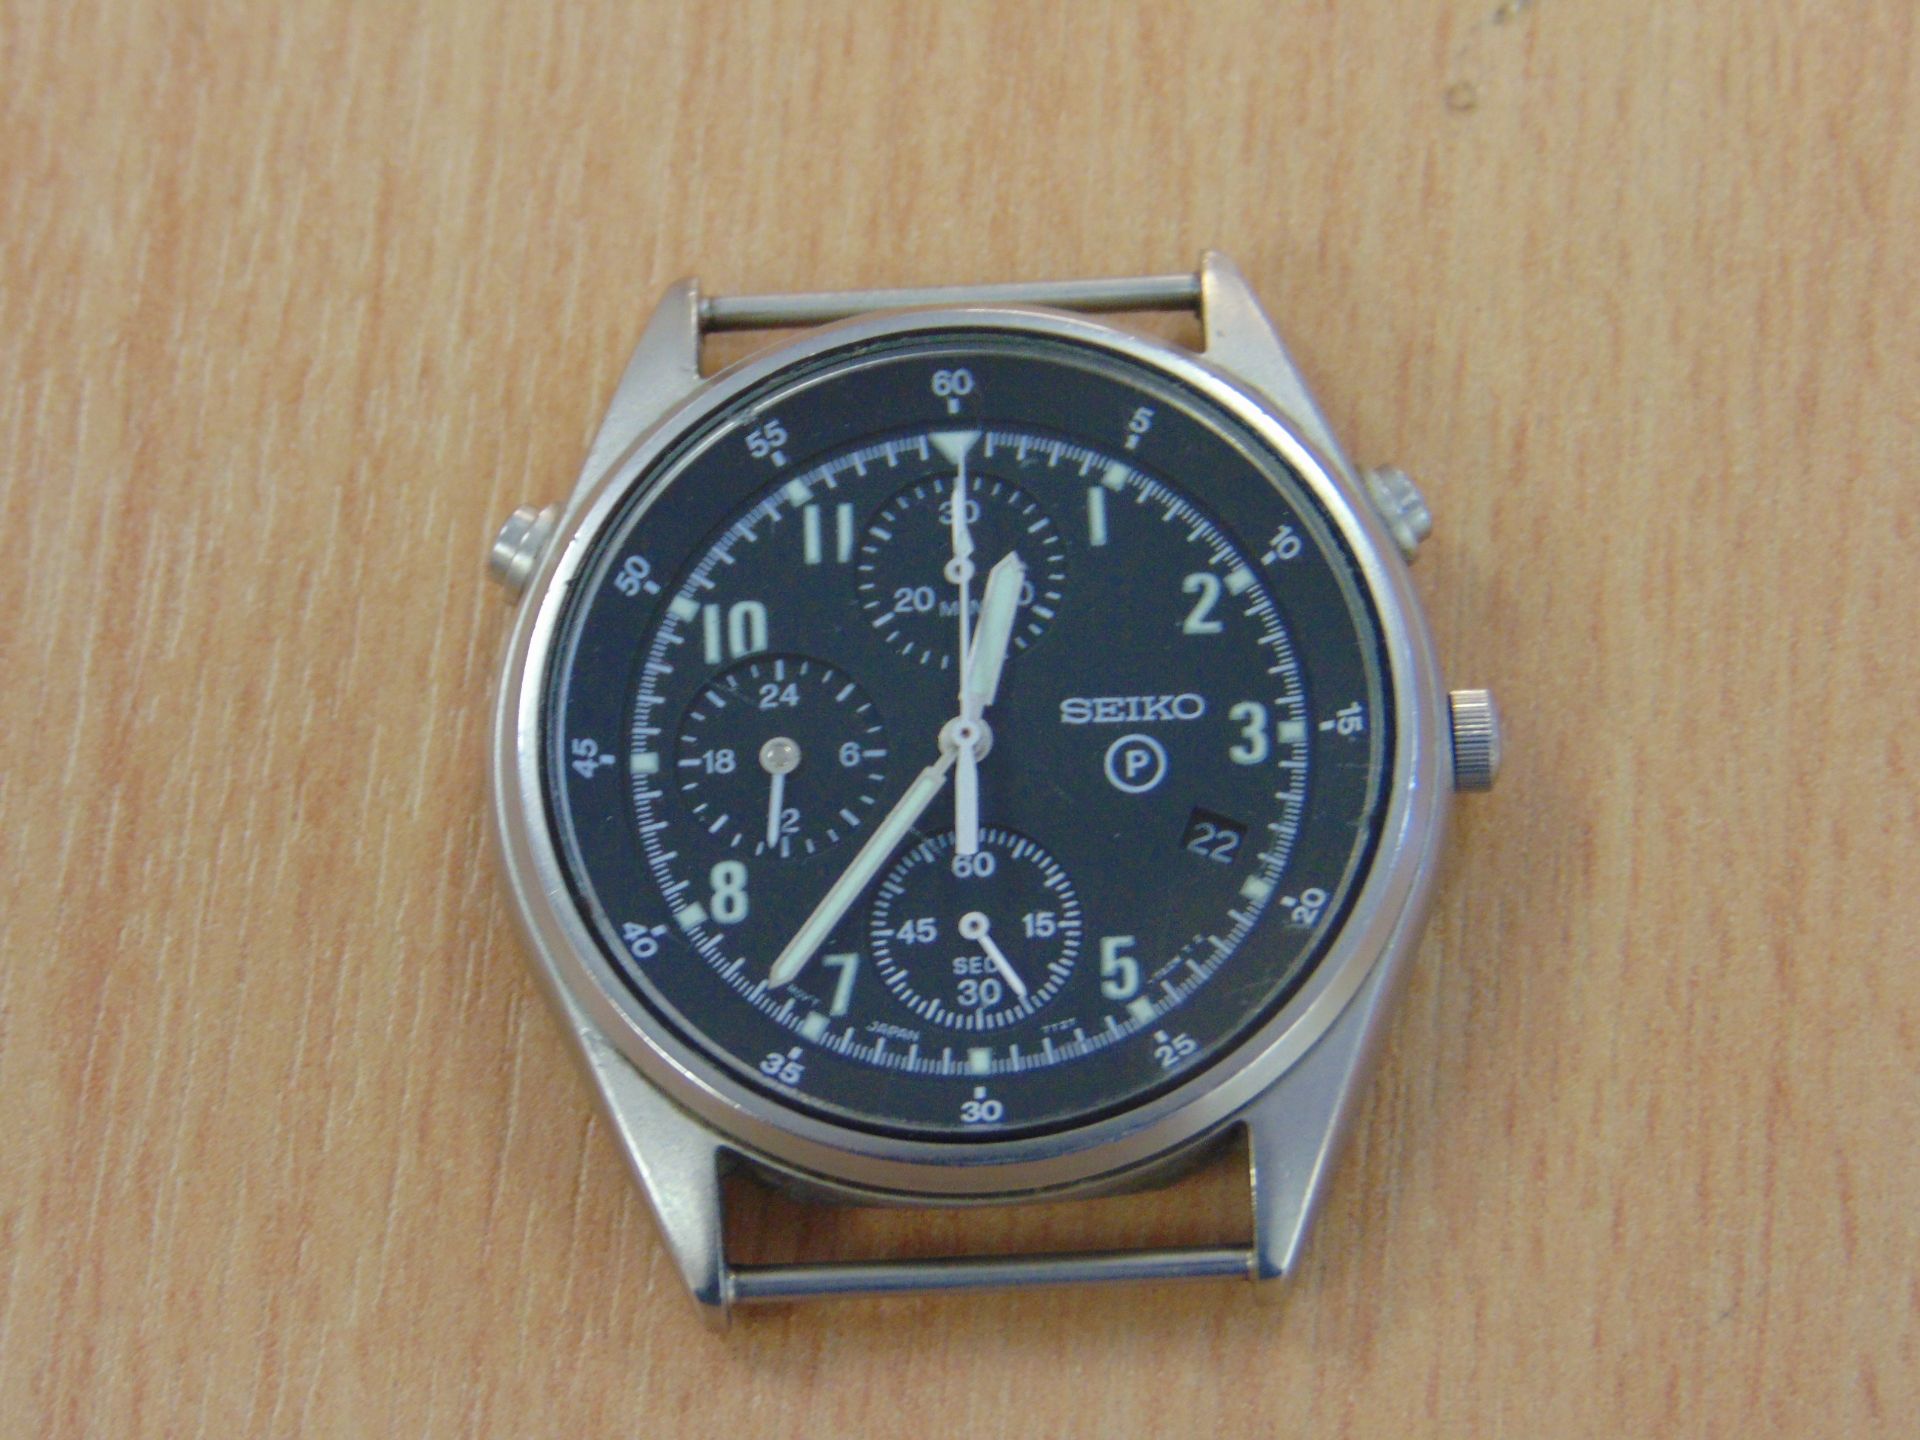 SEIKO GEN 2 RAF ISSUE PILOTS CHRONO WATCH NATO MARKINGS DATED 1997 - Image 3 of 9